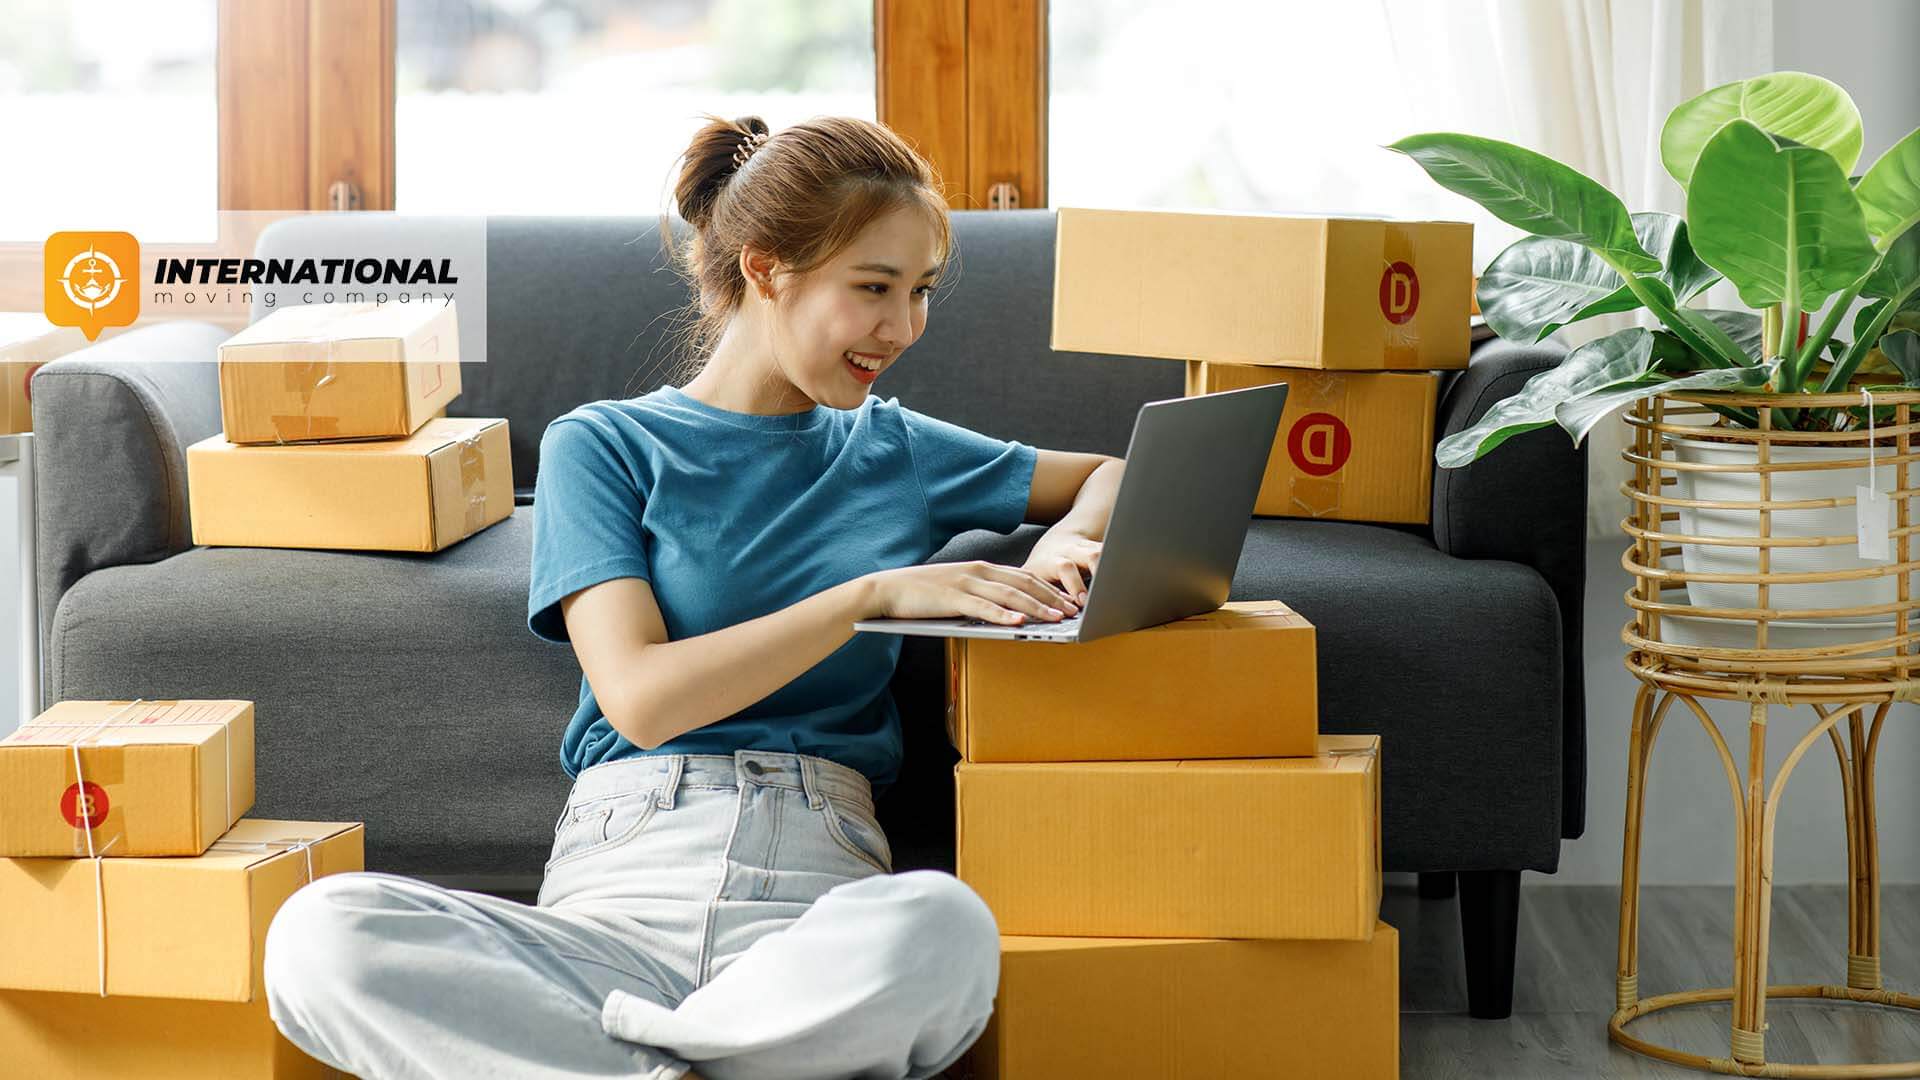 A girl searching for an international moving company on a laptop